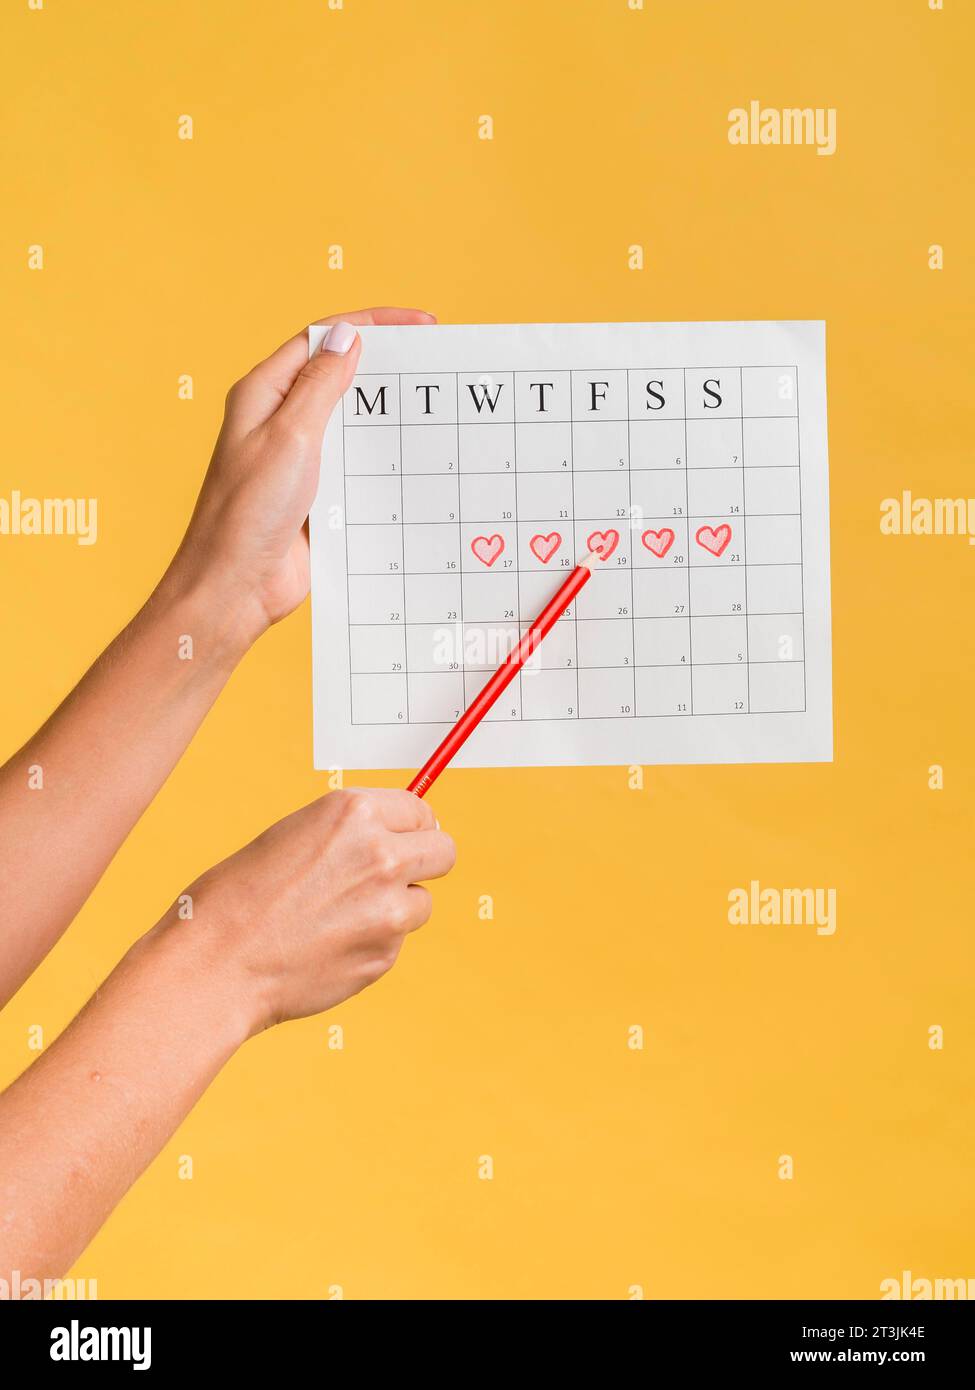 Front view menstruation calendar with hearts pencil Stock Photo